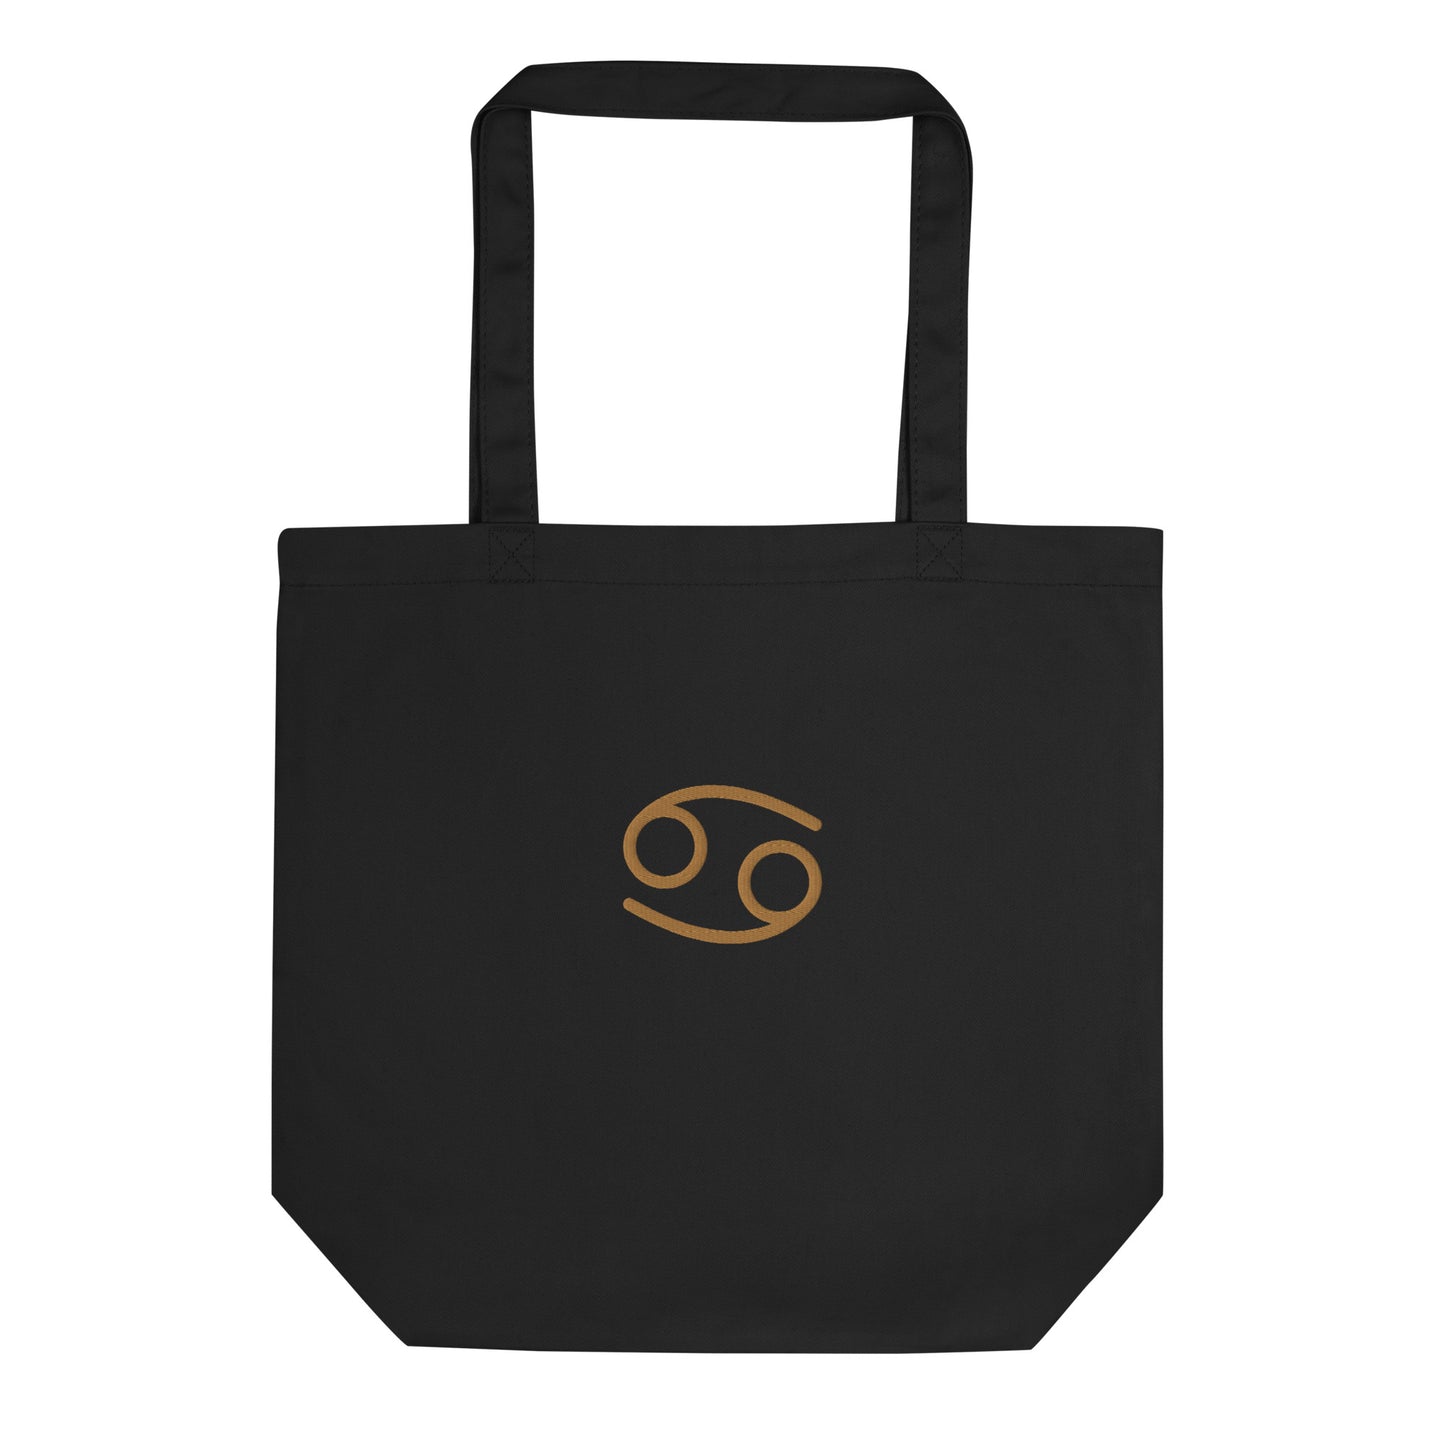 Cancer - Small Open Tote Bag - Gold Thread